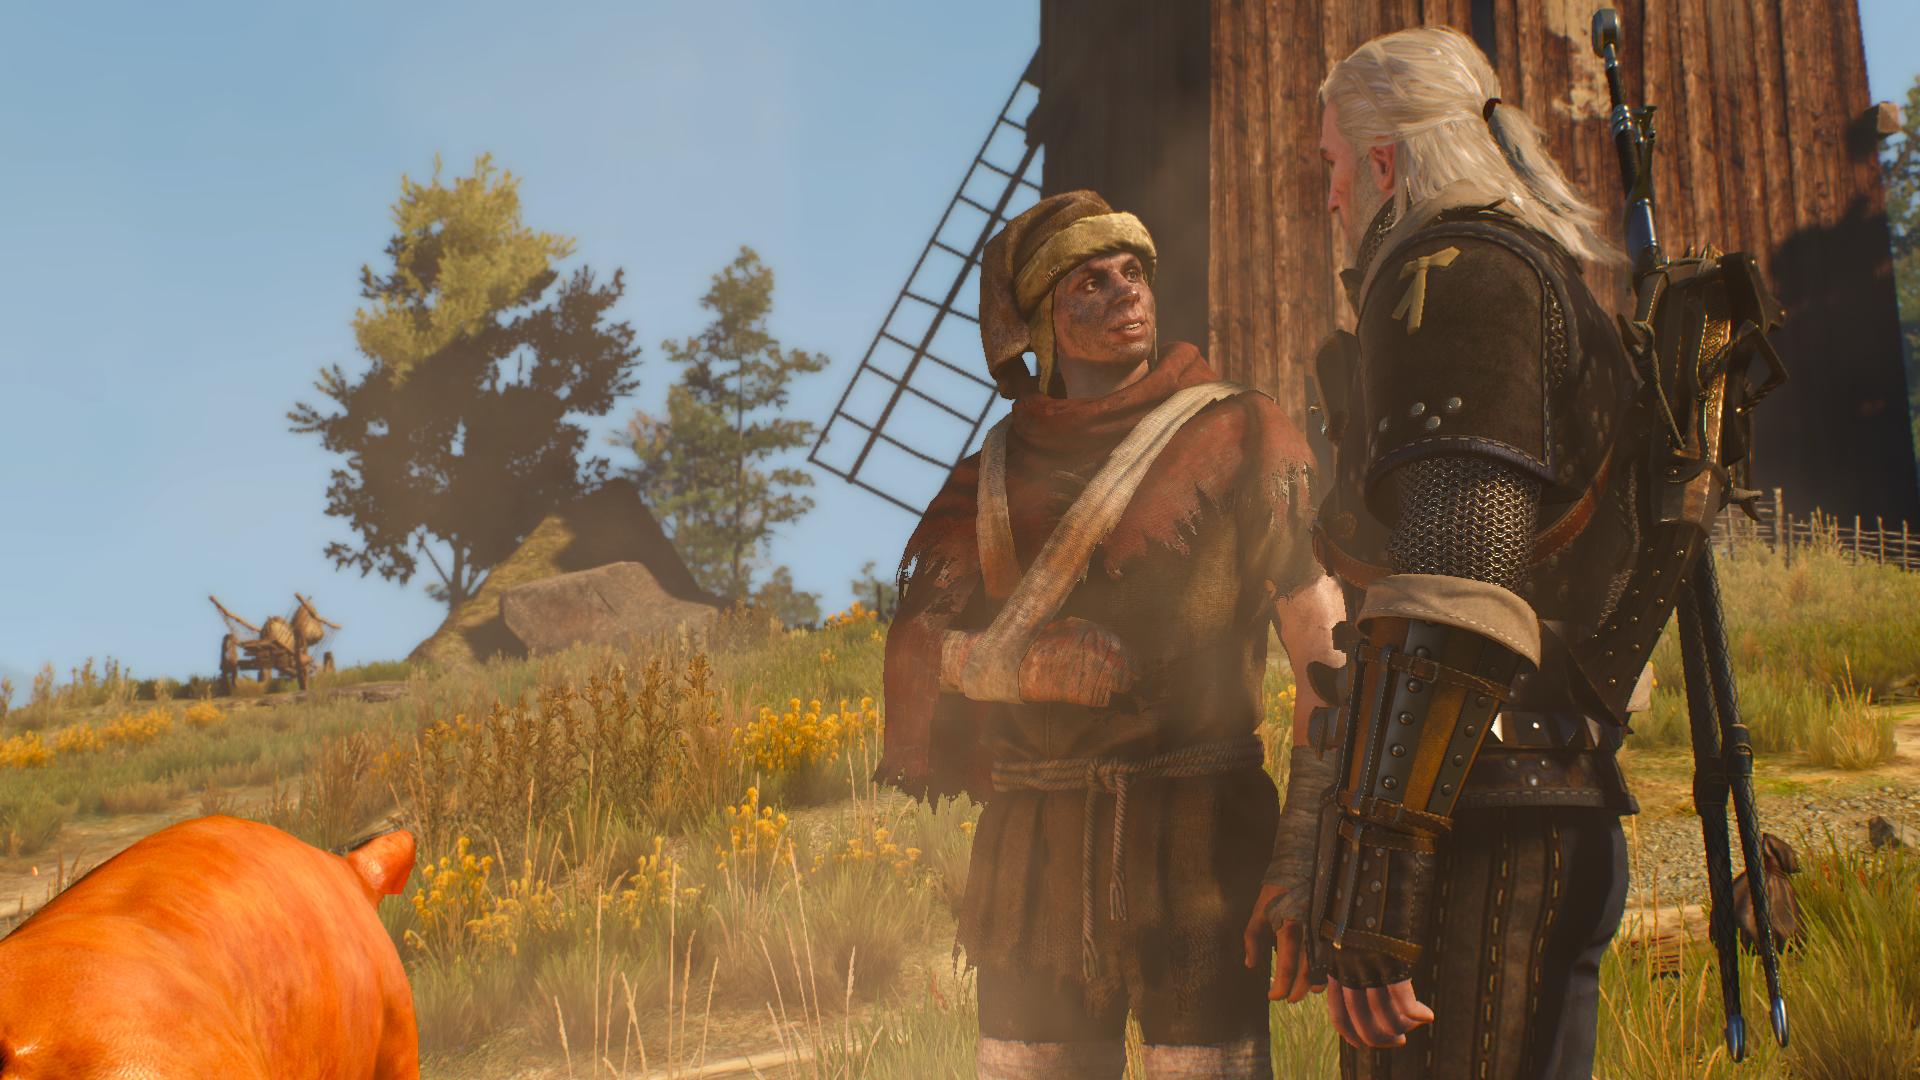 The Witcher 3 Vs. Dragon Age: Inquisition: The Comparison We Had To Make